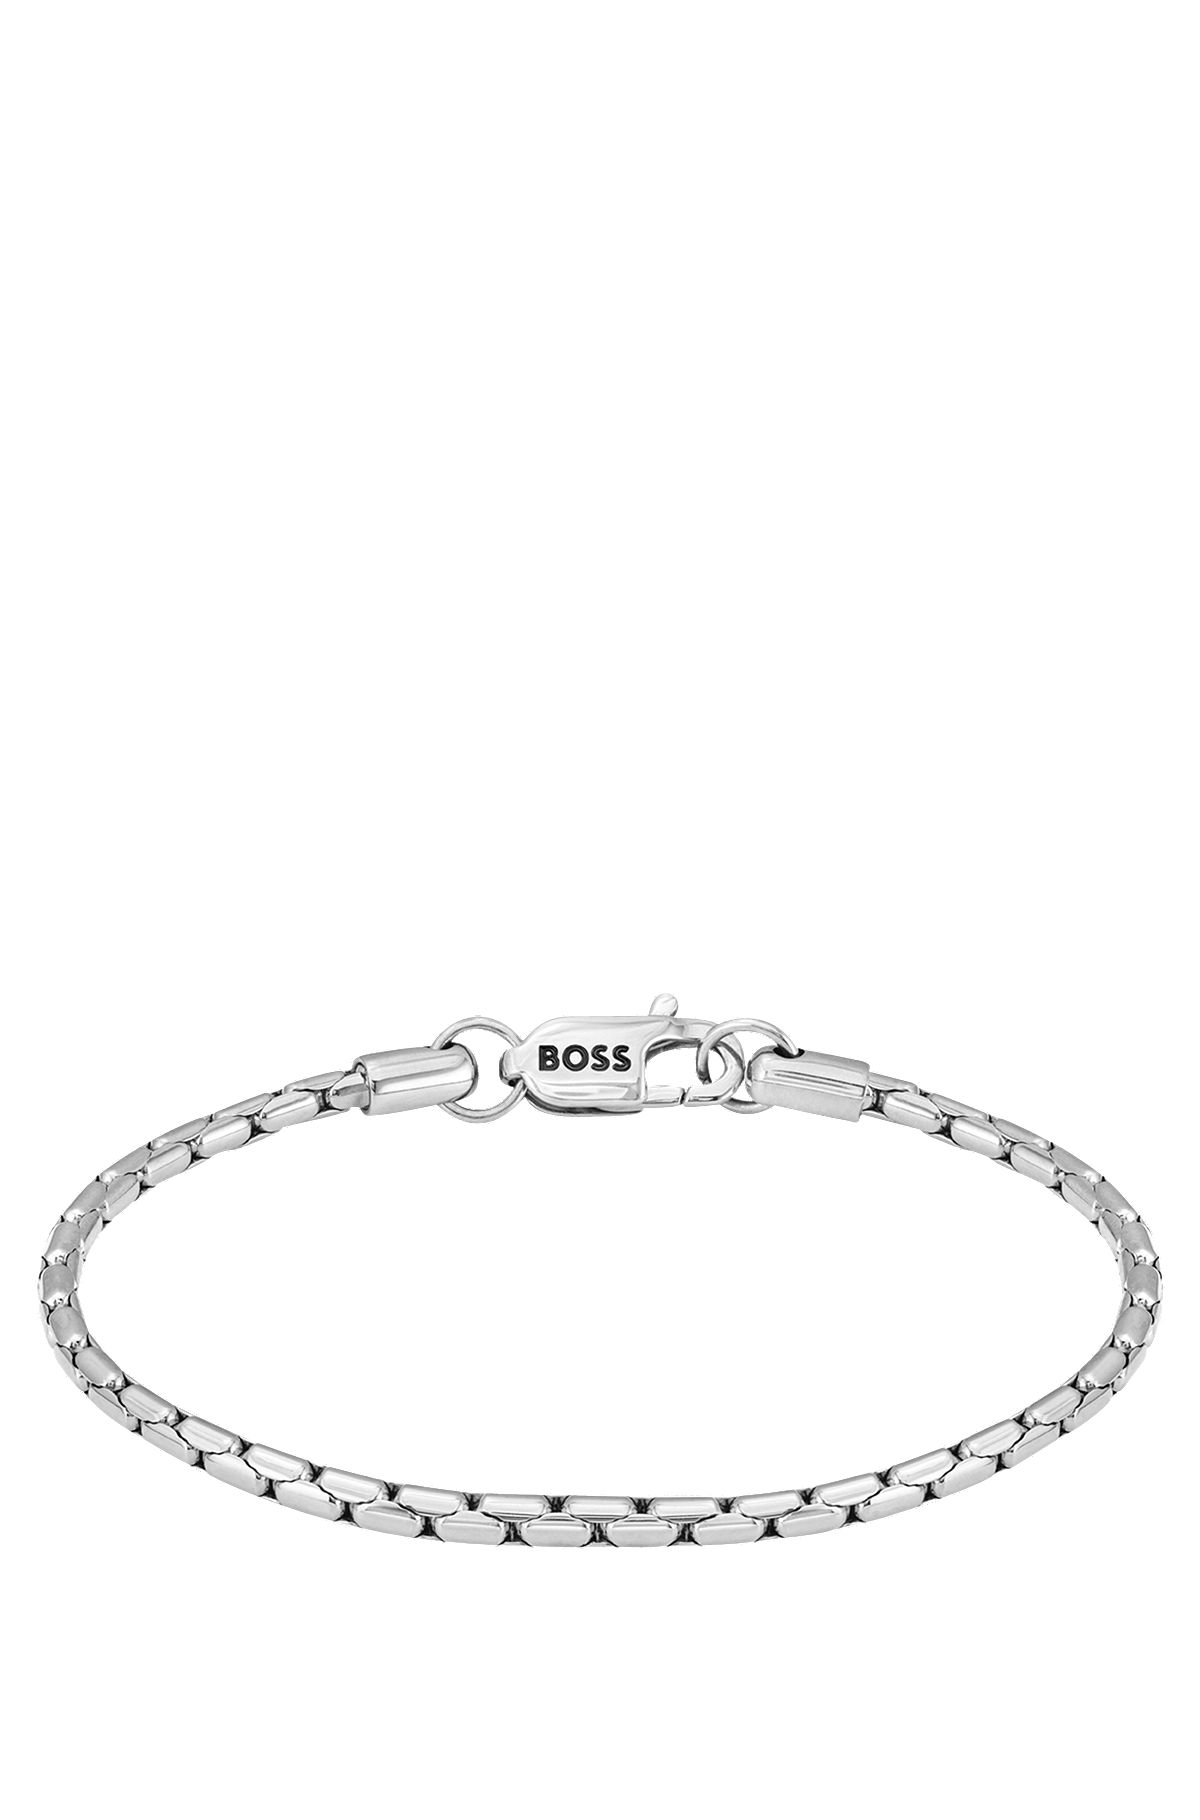 Silver-tone chain cuff with branded lobster clasp, Silver tone